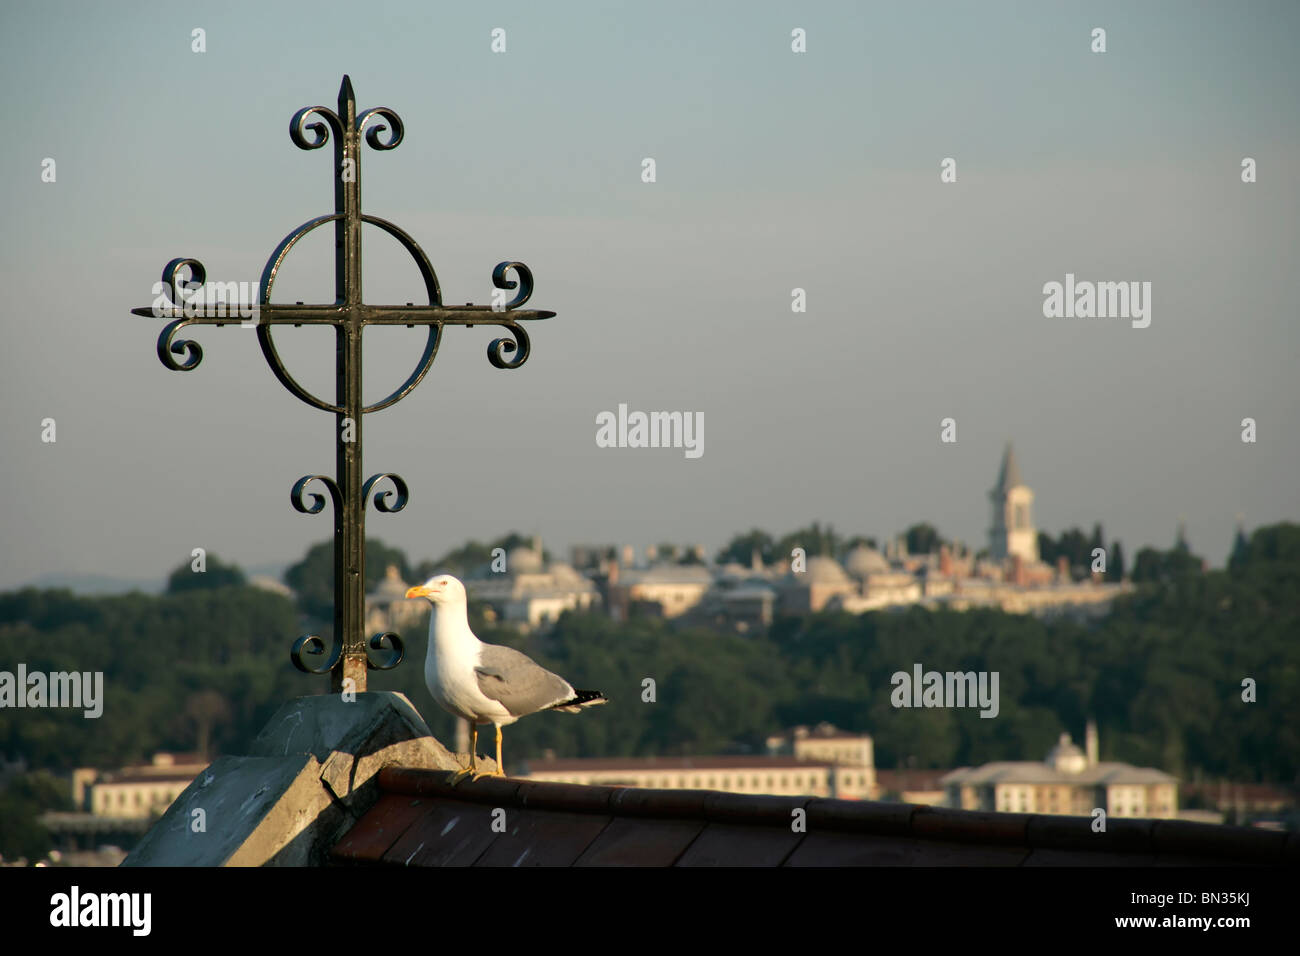 The cross of the Crimean Church in Galata with the Topkapi Palace in the background, Istanbul, Turkey Stock Photo